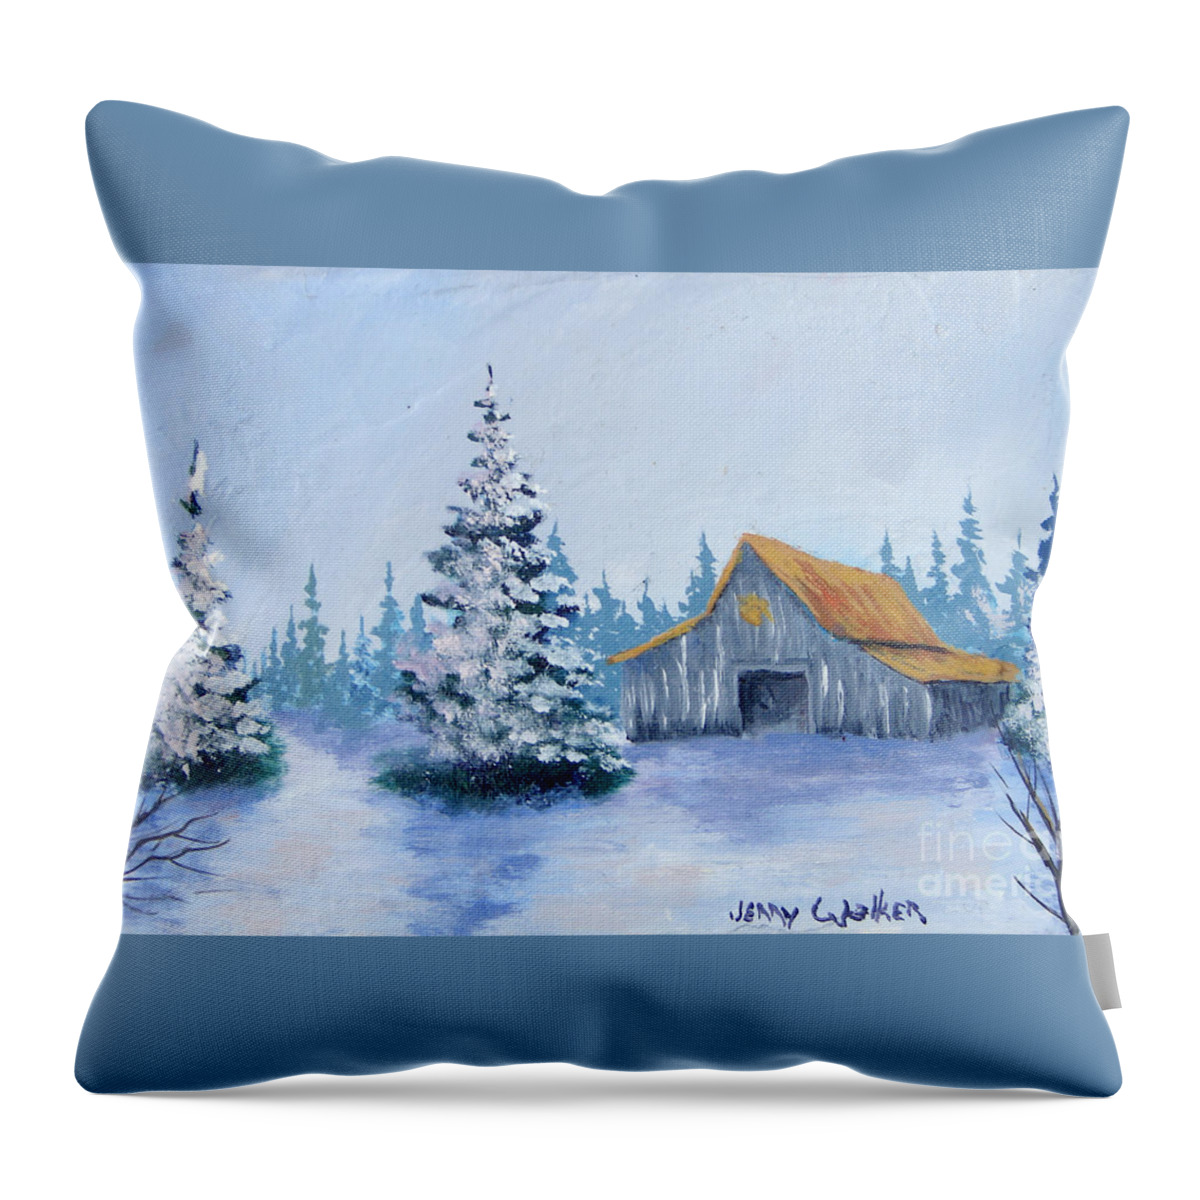 Cold Throw Pillow featuring the painting Clemson Winter by Jerry Walker